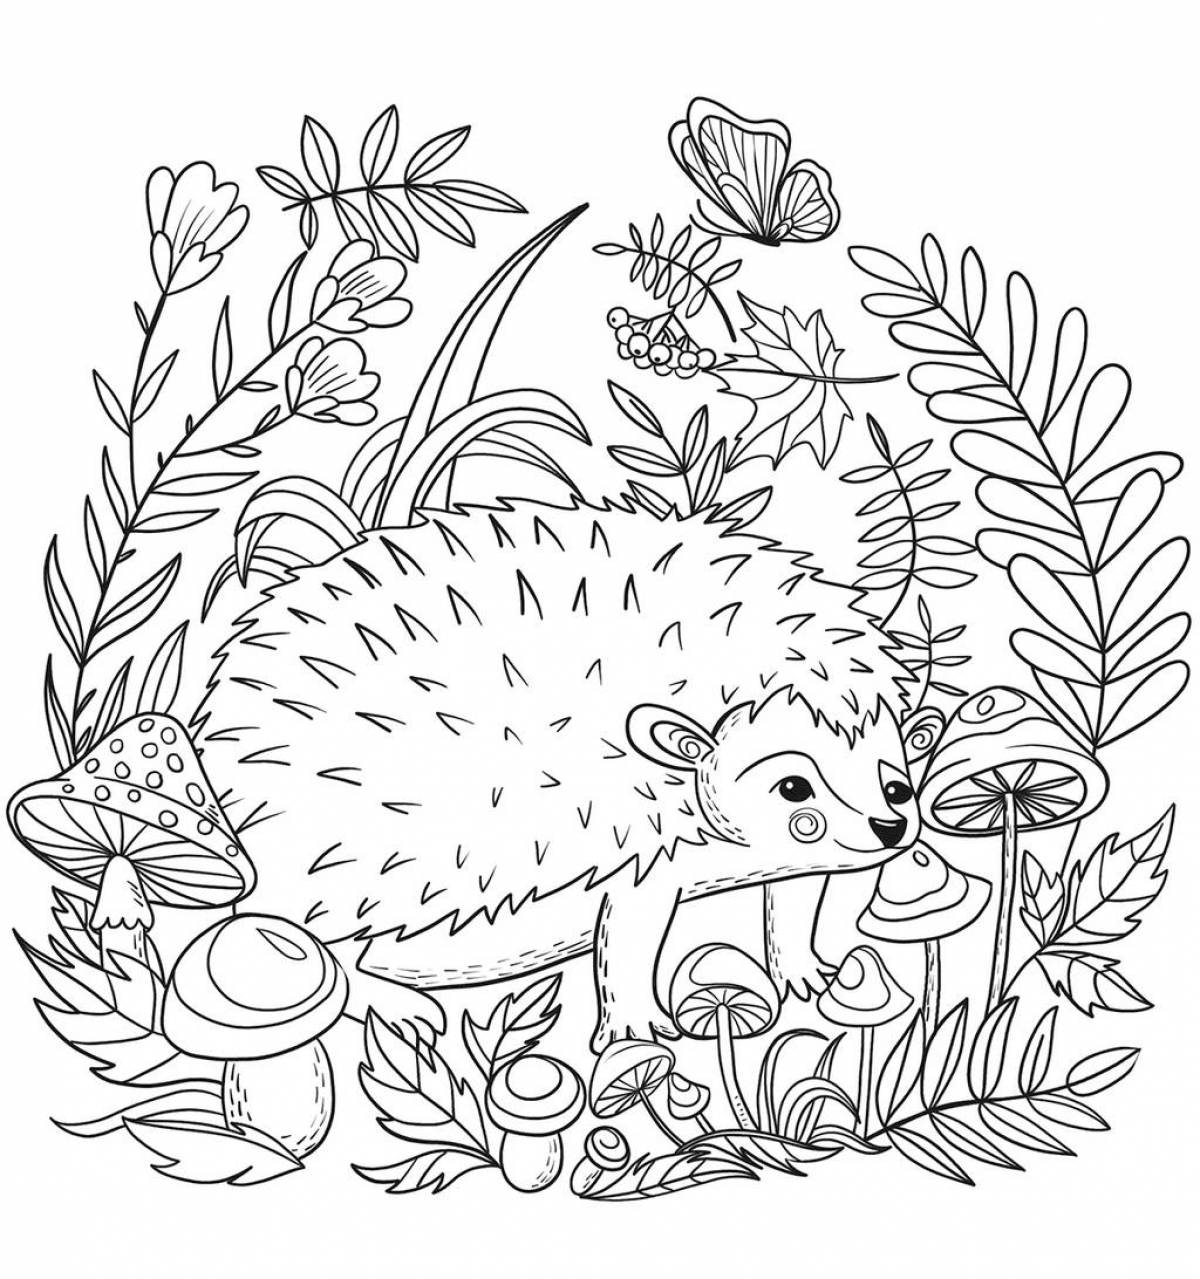 Glittering hedgehog coloring page